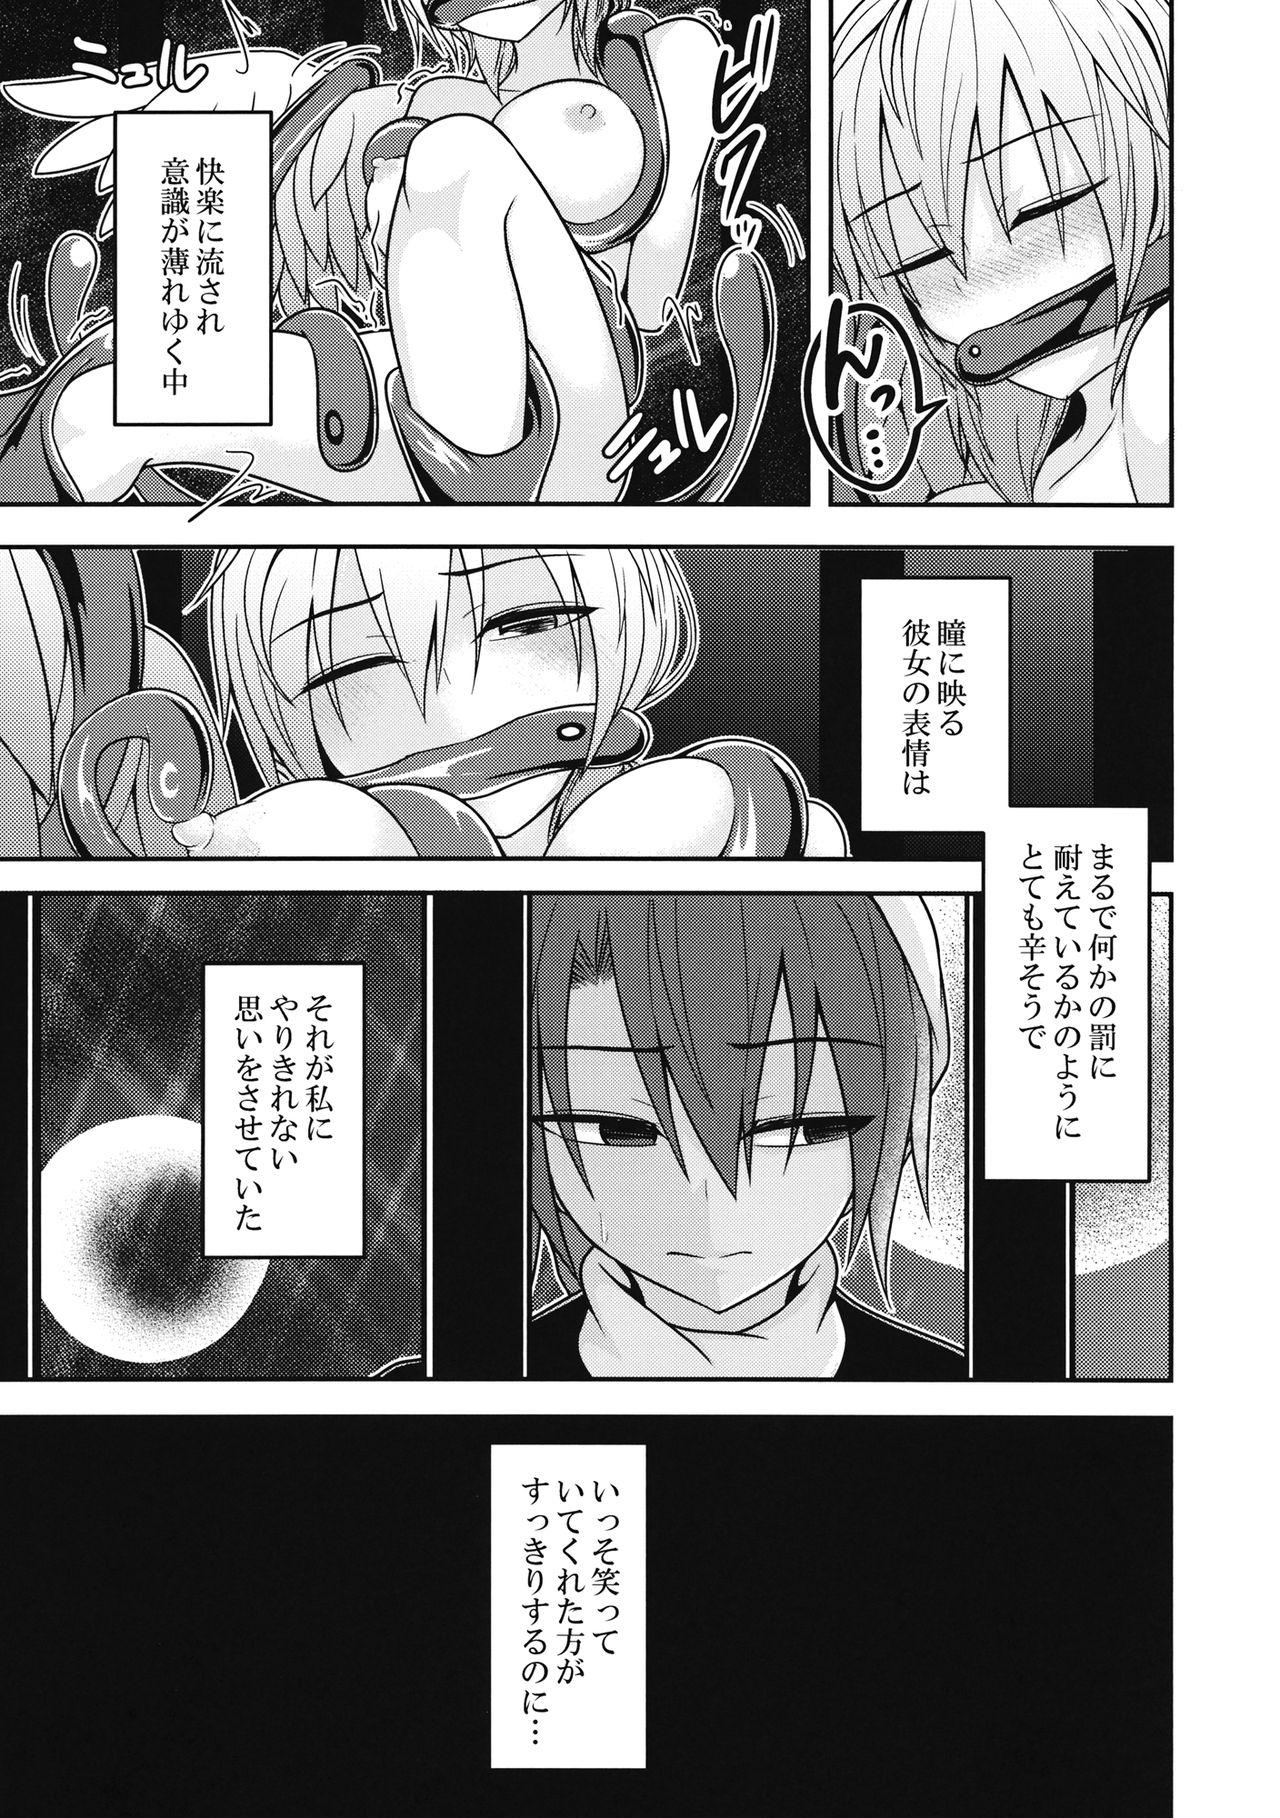 Snatch Yume no Torikago - Touhou project Publico - Page 10